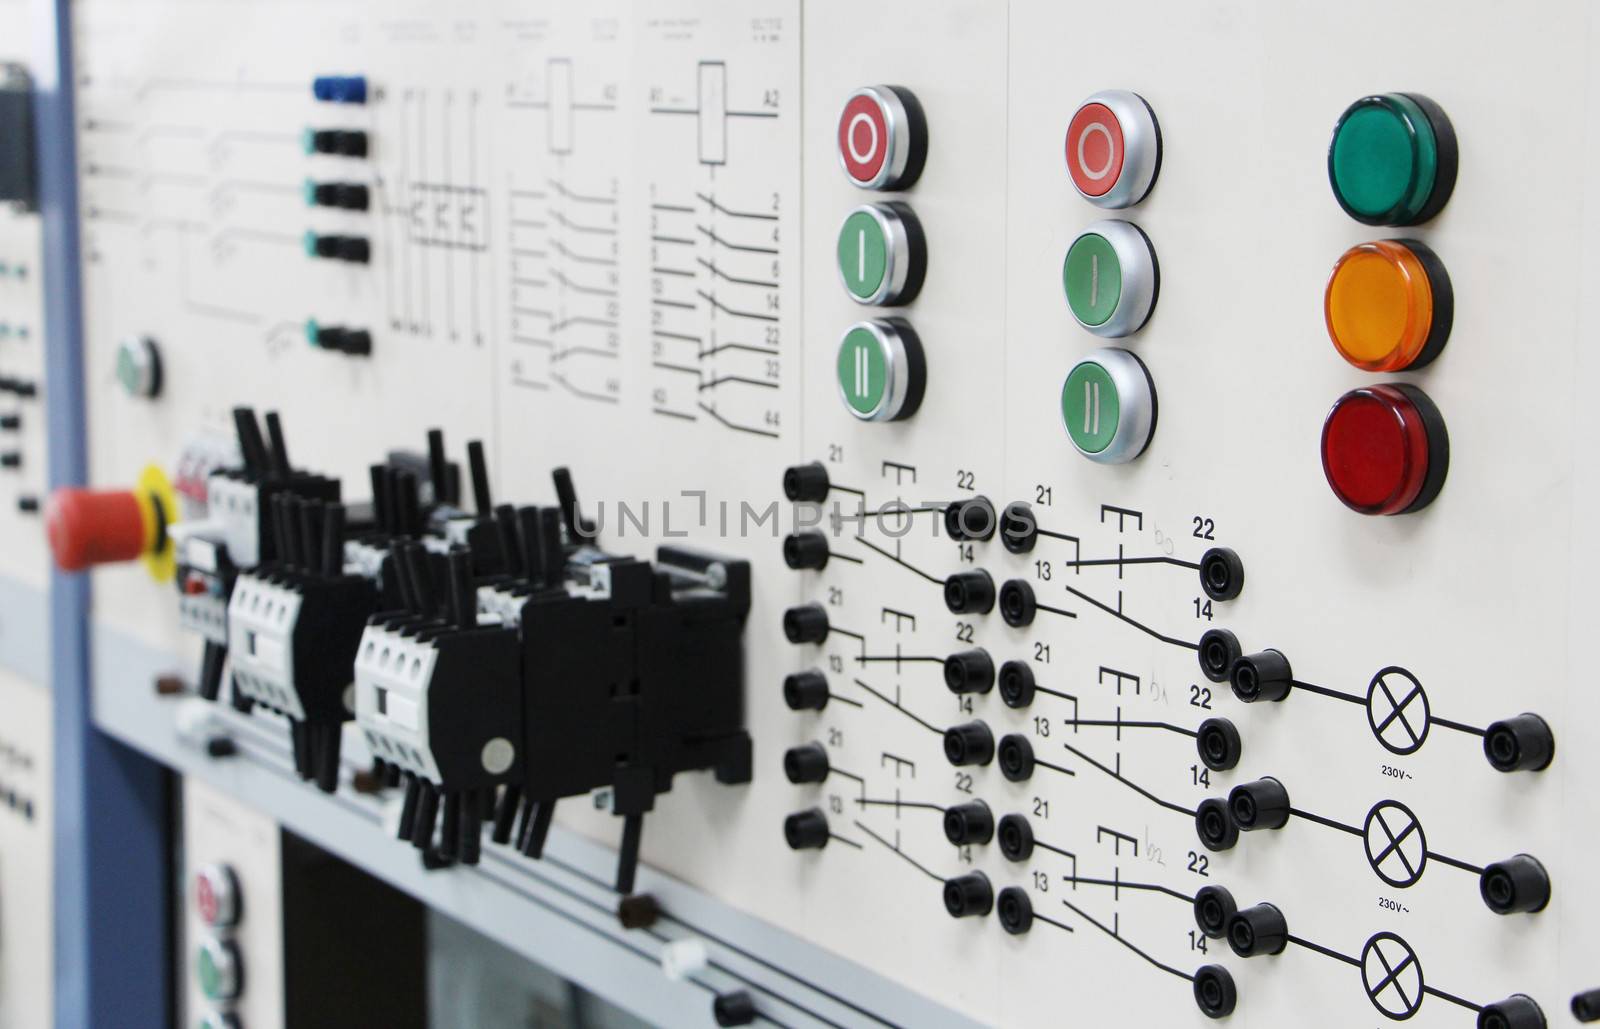 Control panels in an electronics lab by HD_premium_shots